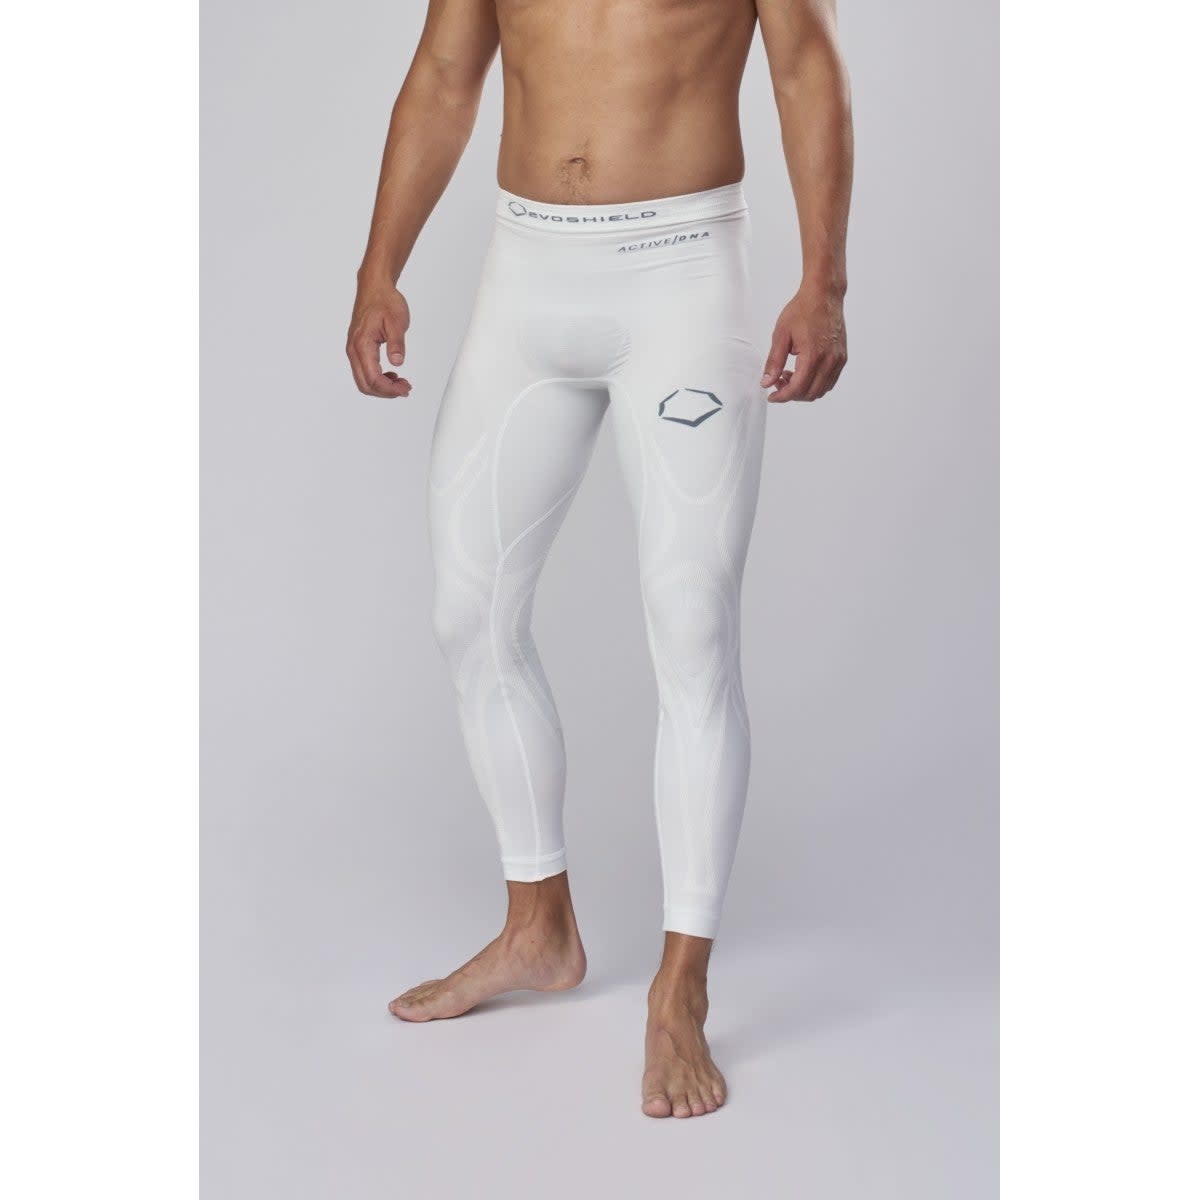 Evoshield active DNA compression tight pants large